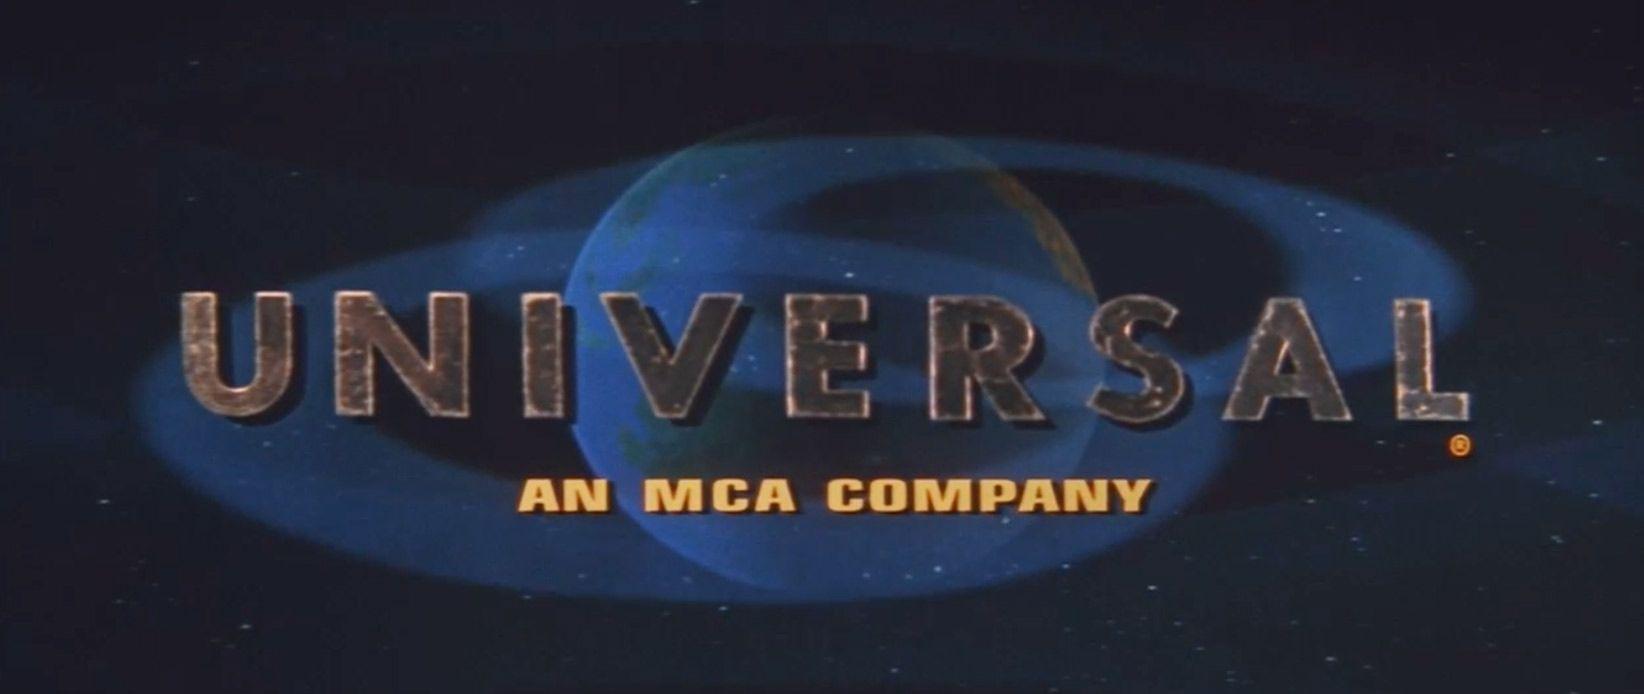 Major Movie Production Logo - Universal Pictures | About the Film Studio